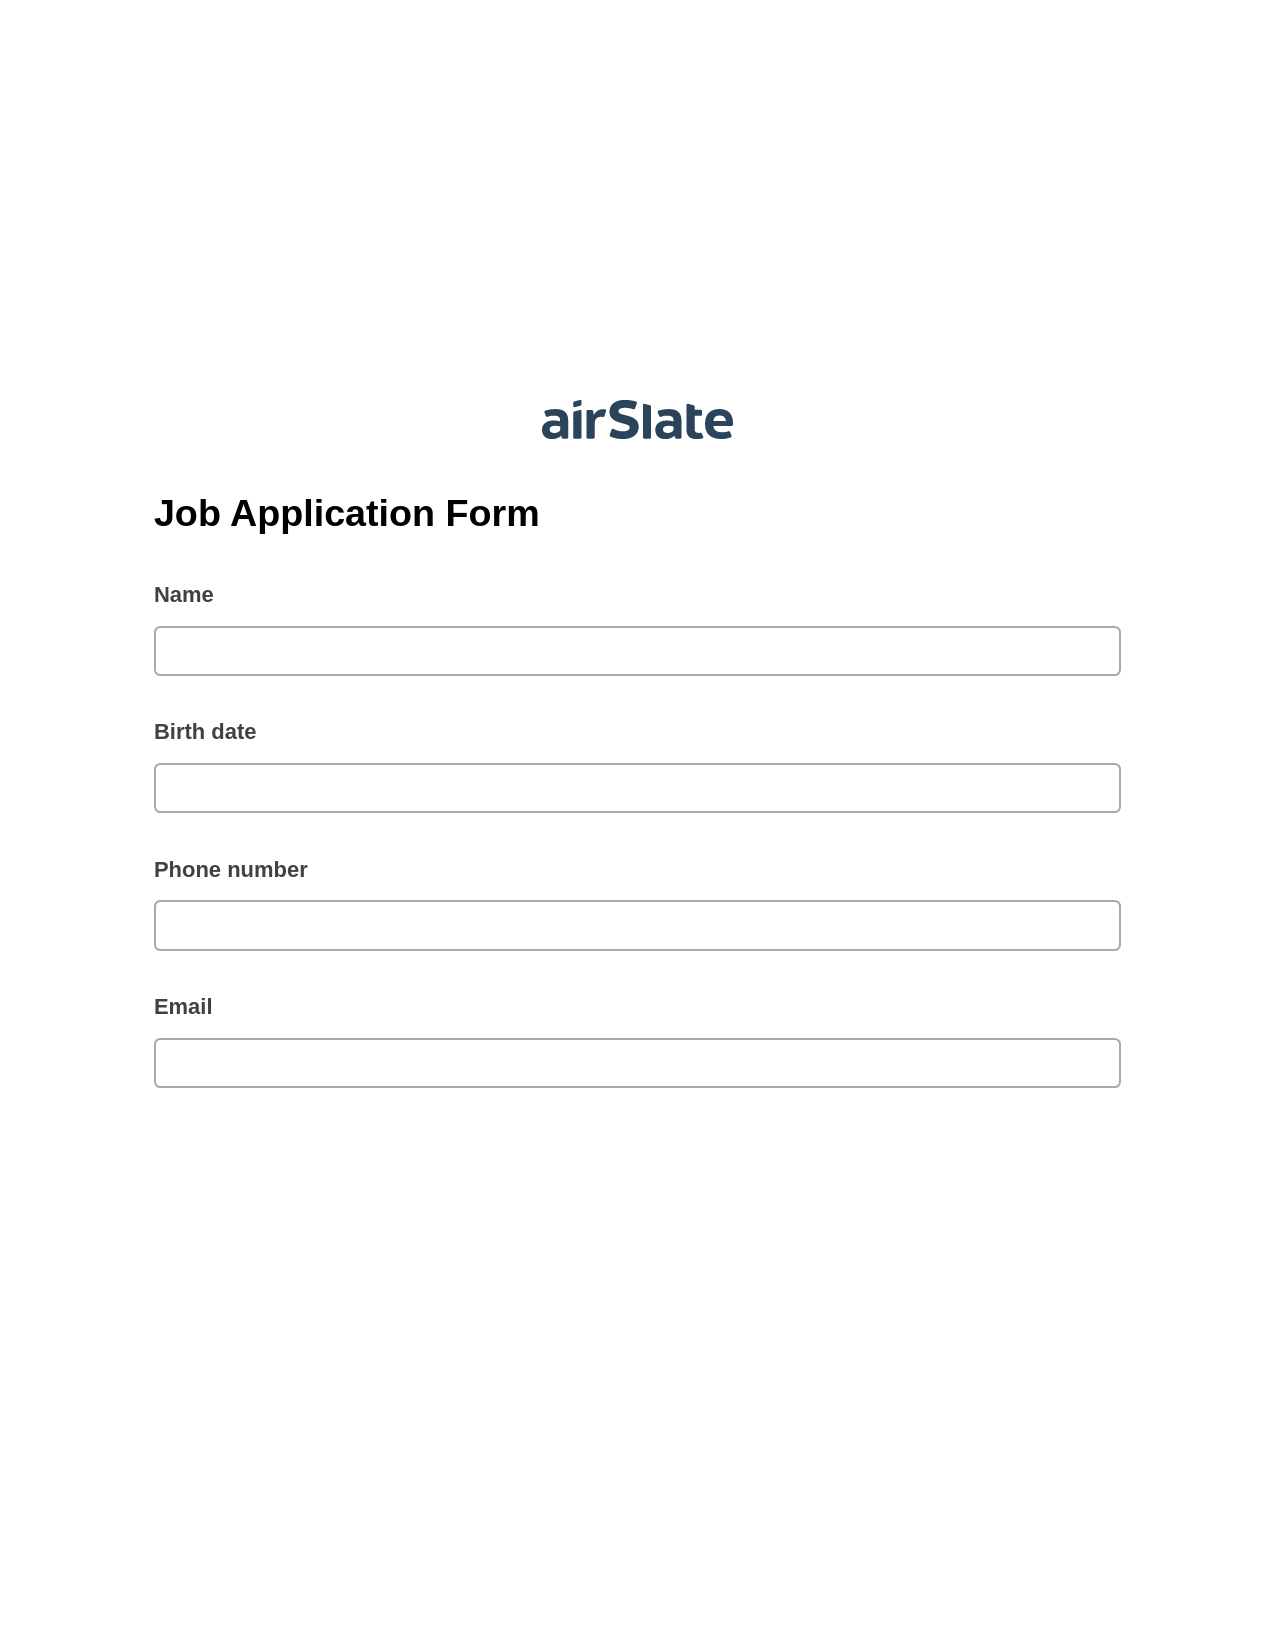 Job Application Form Pre-fill from Excel Spreadsheet Dropdown Options Bot, System Bot - Create a Slate in another Flow, Dropbox Bot